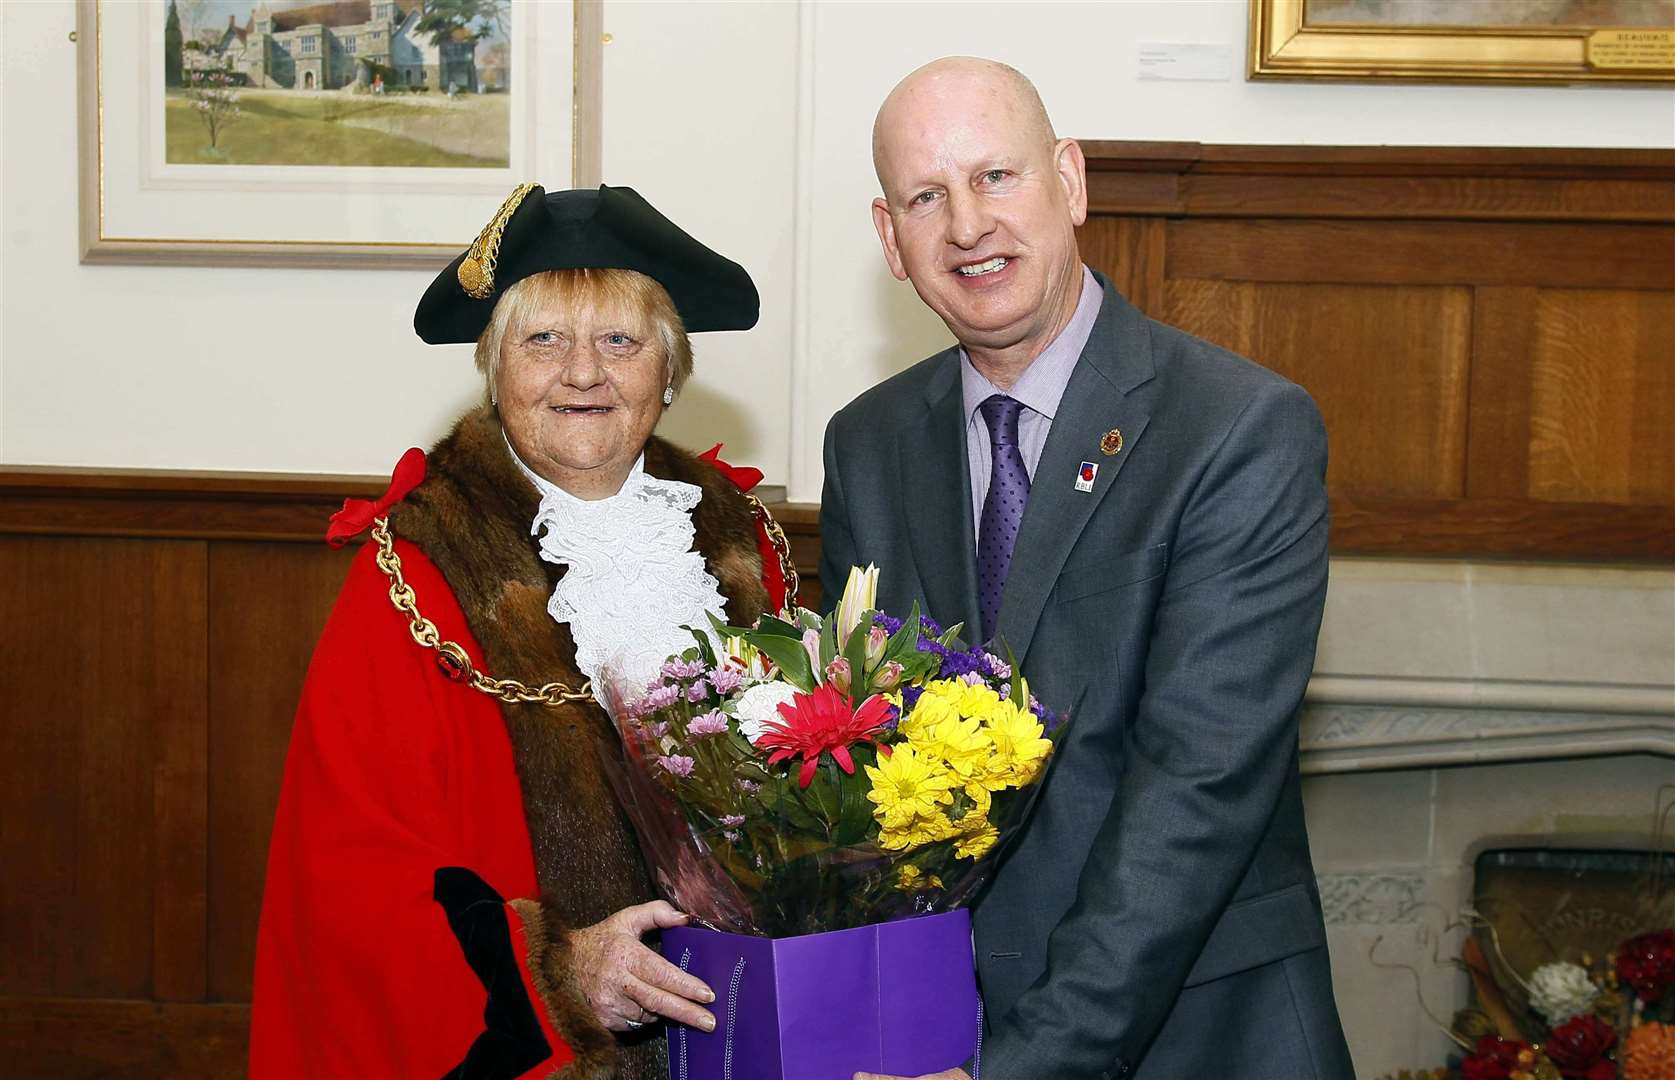 Marion Ring taking over as Mayor from Cllr Dave Naghi in 2019